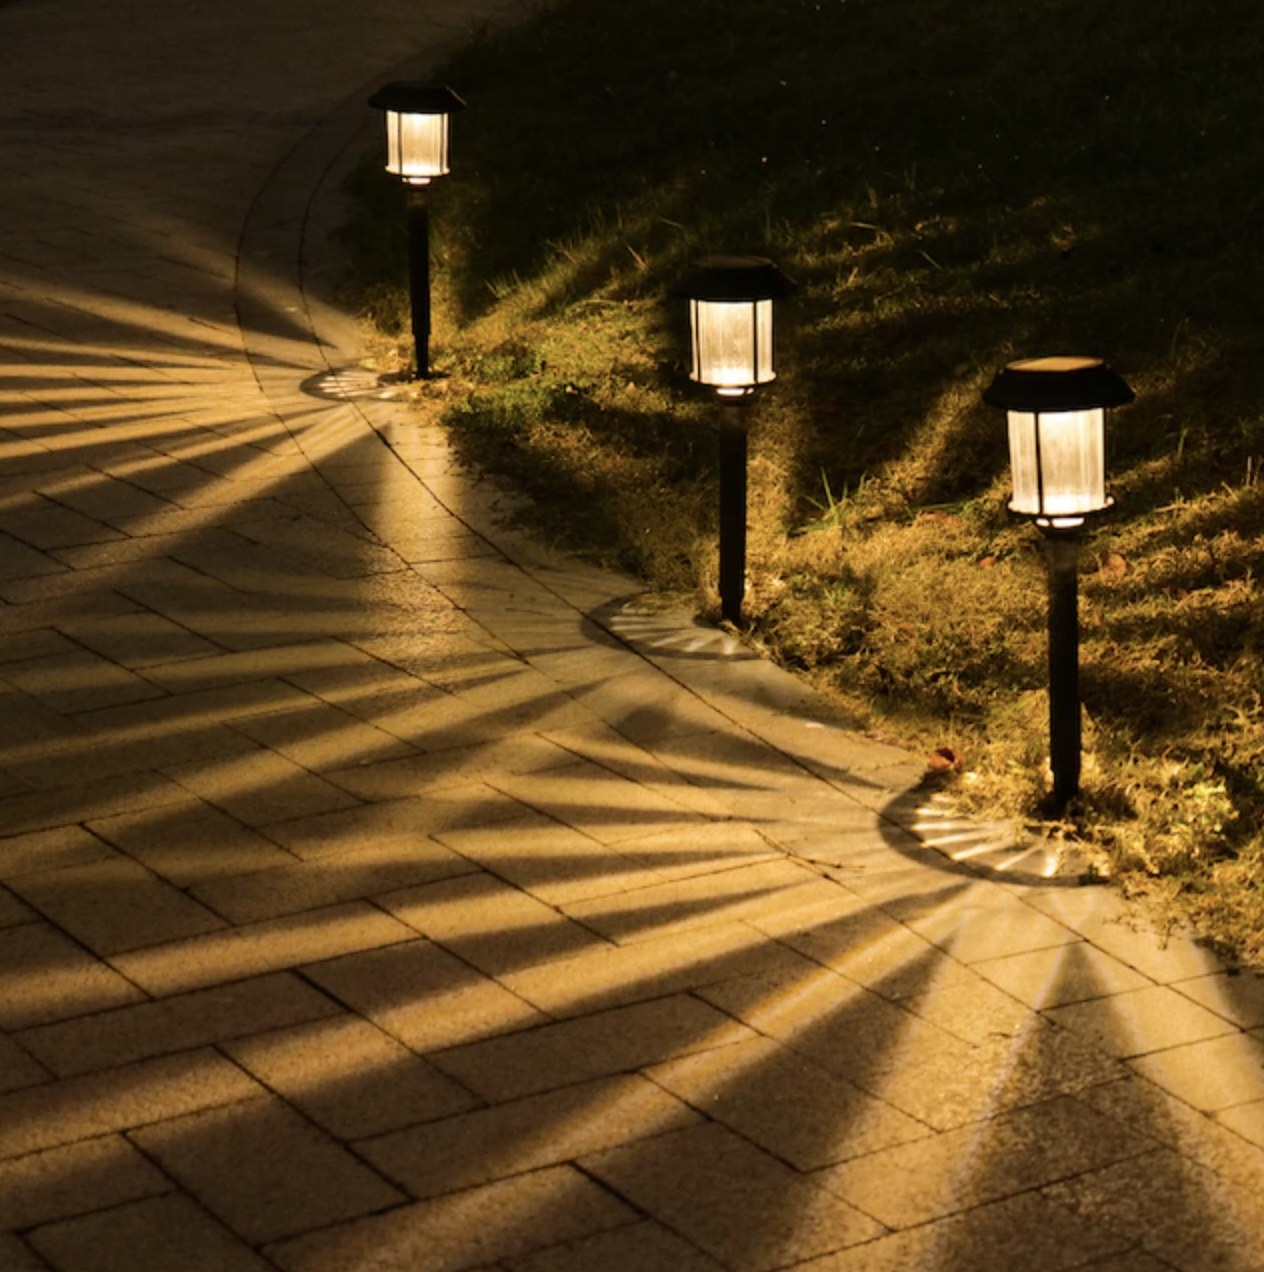 Three of the path lights glowing outside along front walkway